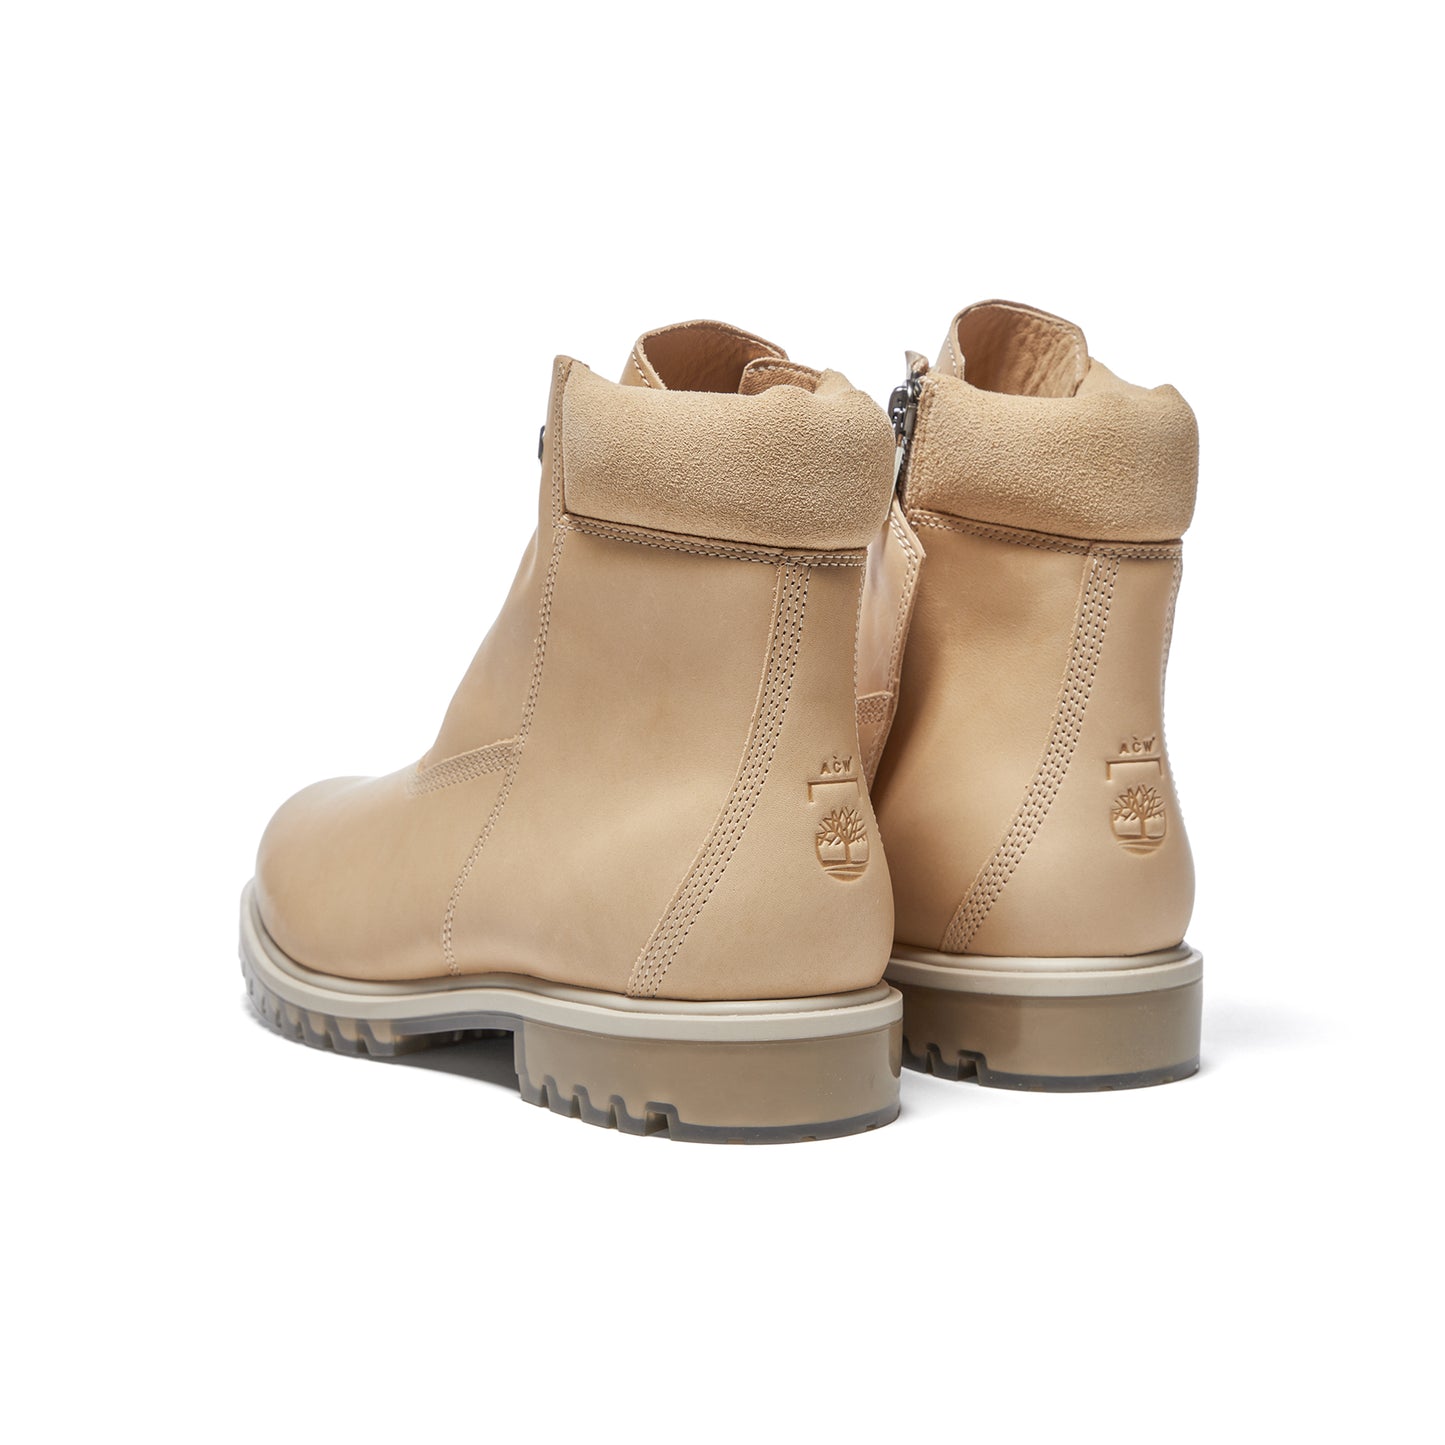 A-COLD-WALLx TBL 6 inch Boot (Stone)